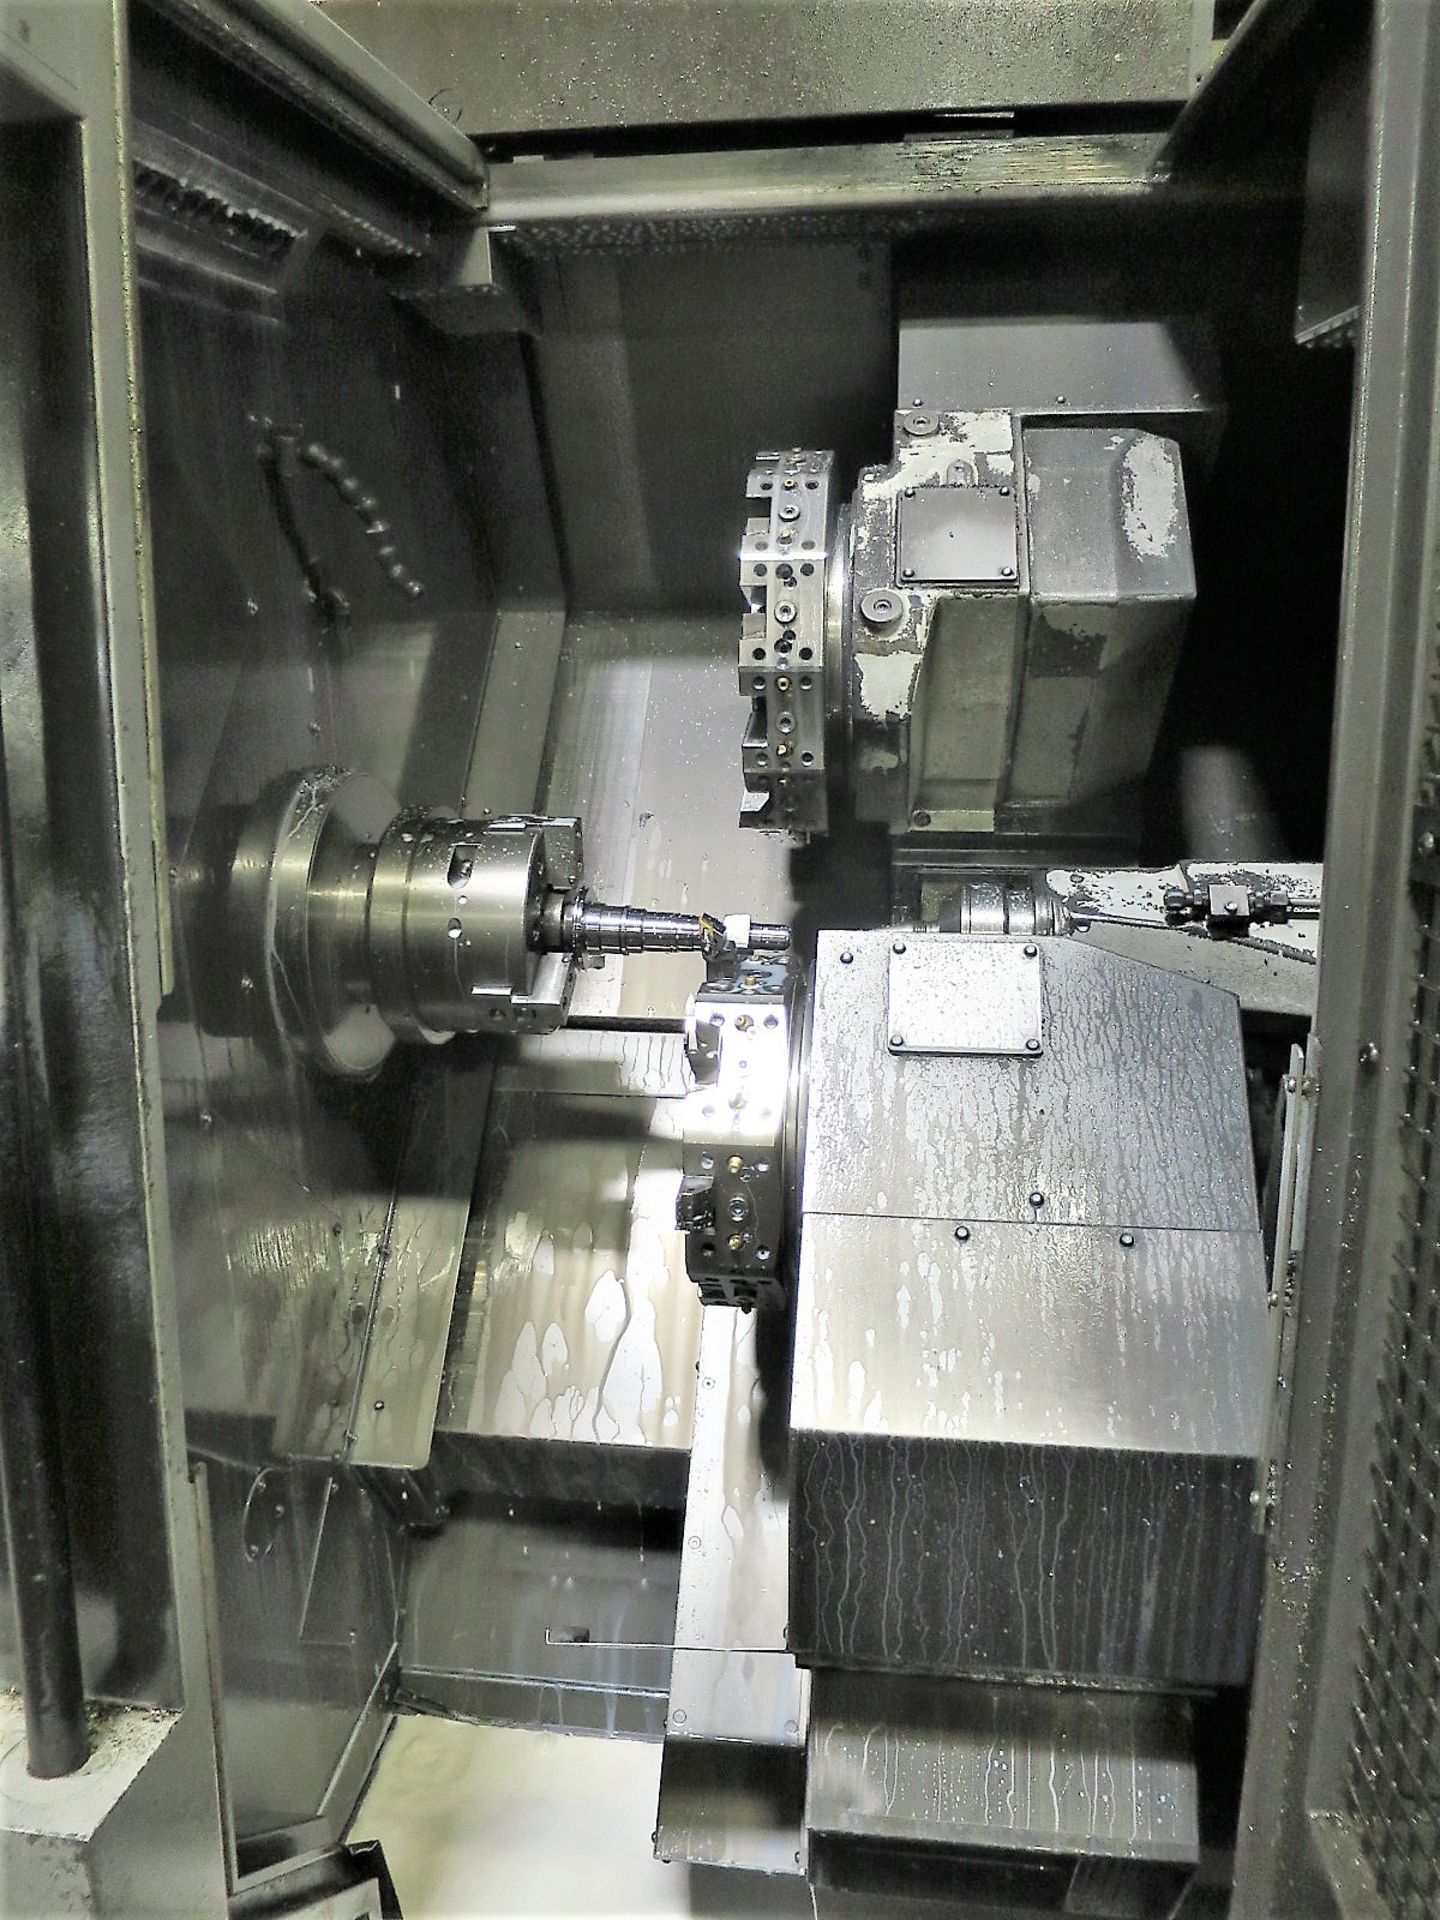 ***SOLD SOLD SOLD*** OKUMA LU-3000 EX 2SC-600 4-AXIS TWIN TURRENT CNC LATHE, NEW 2015, S/N 184757 - Image 3 of 7